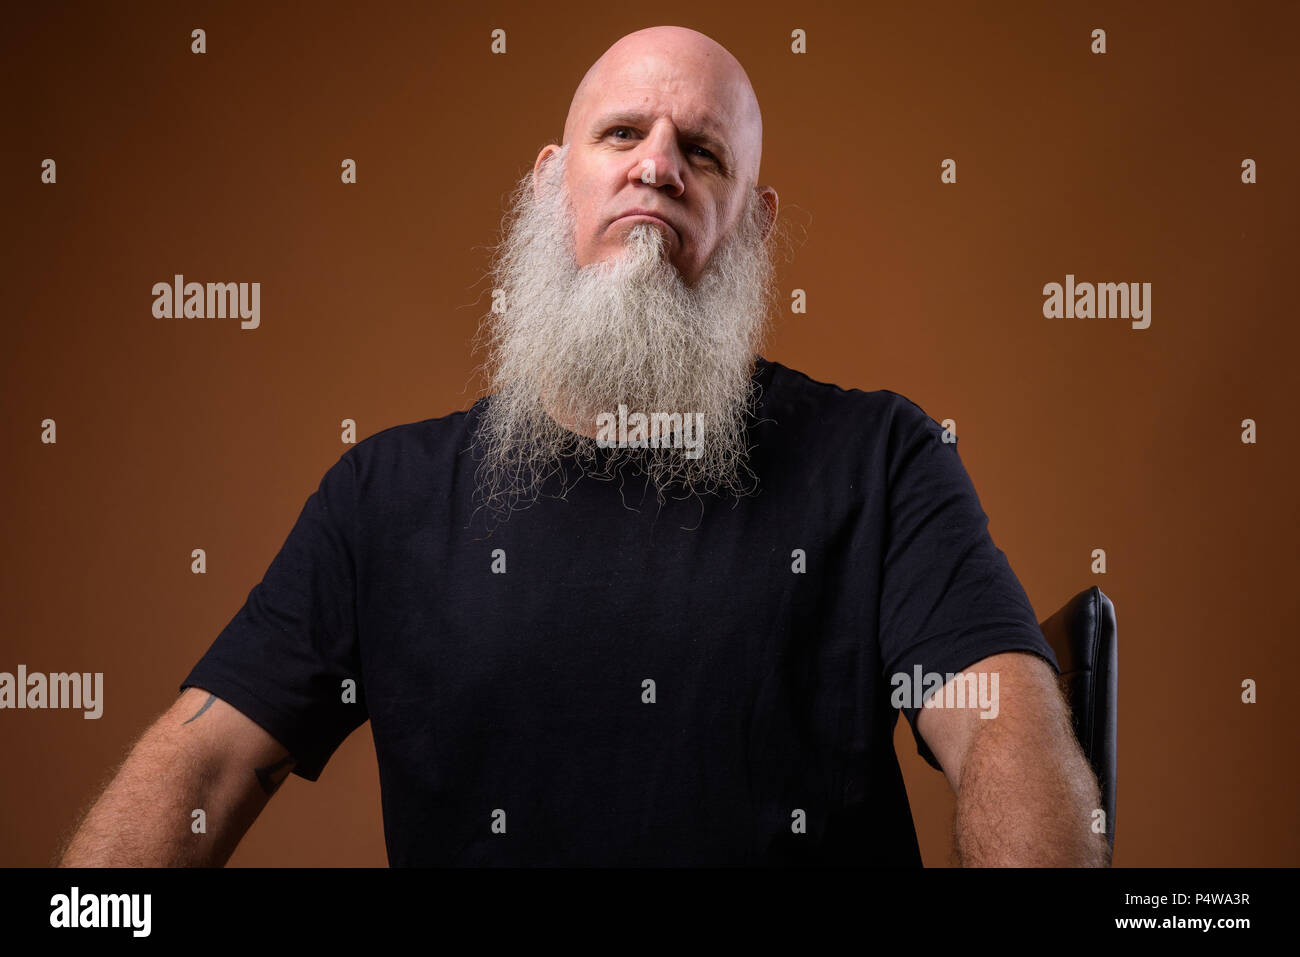 Mature bald man with long gray beard against brown background Stock Photo